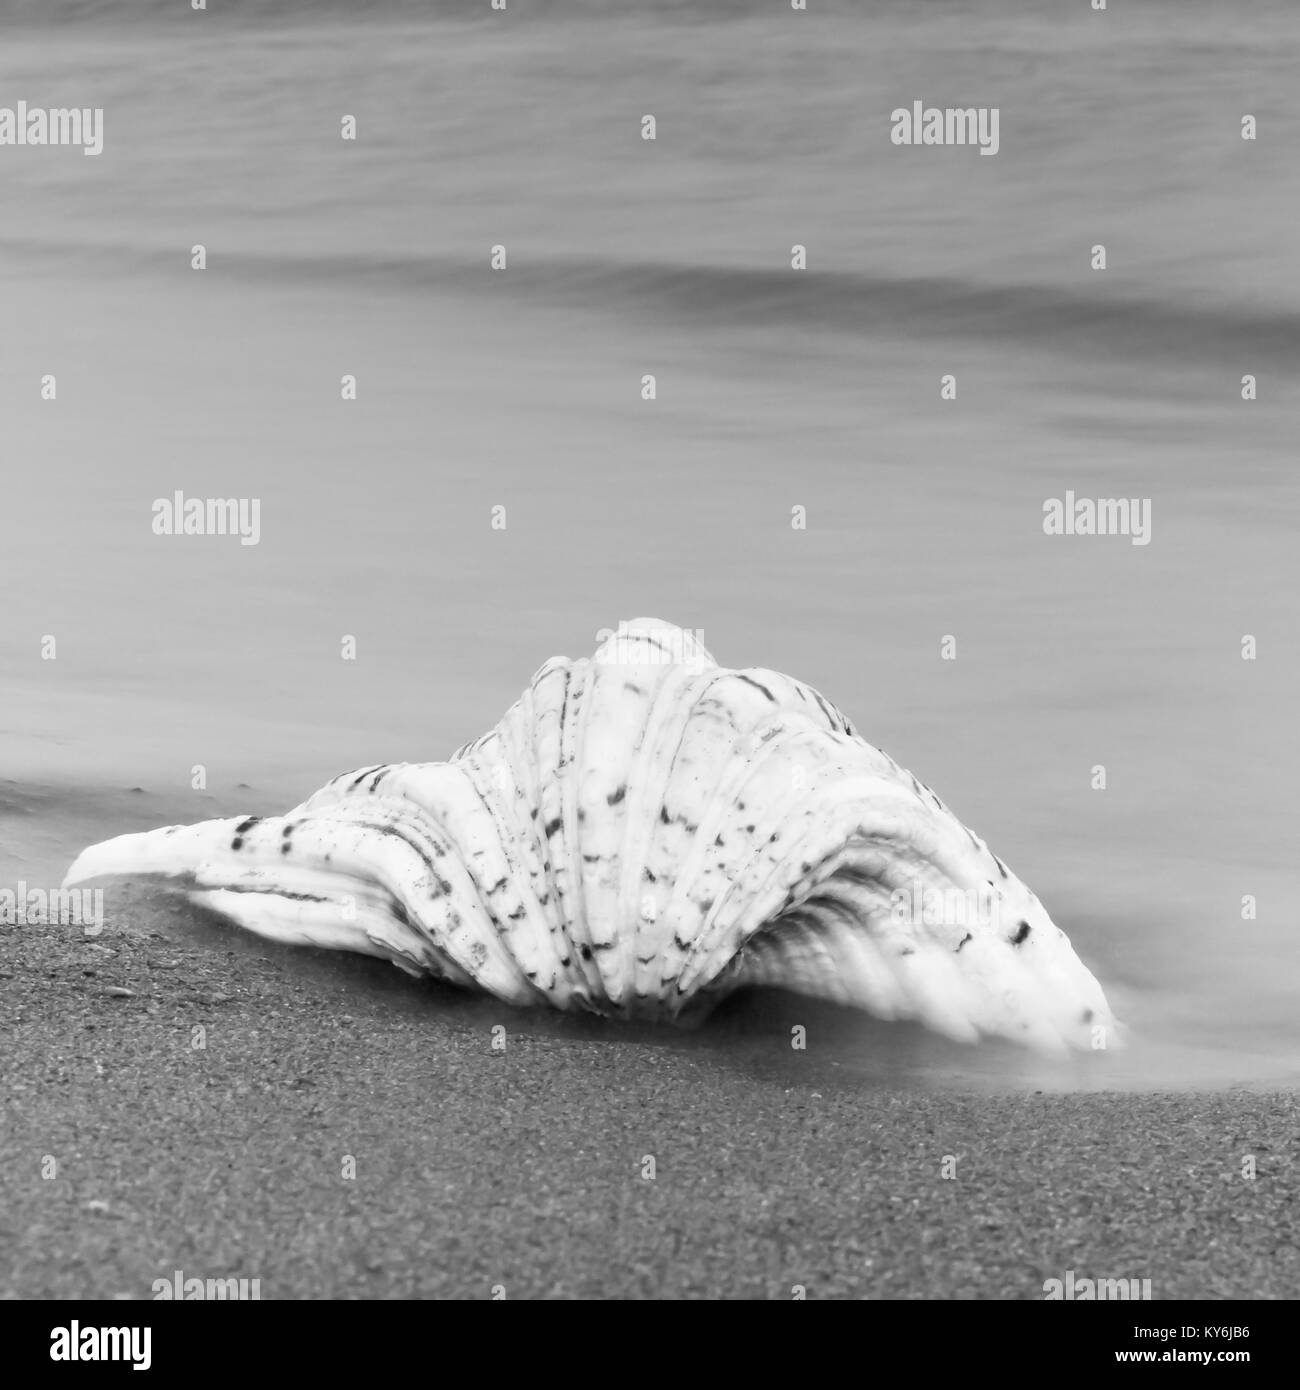 Big seashell in black and white against the sea. Stock Photo